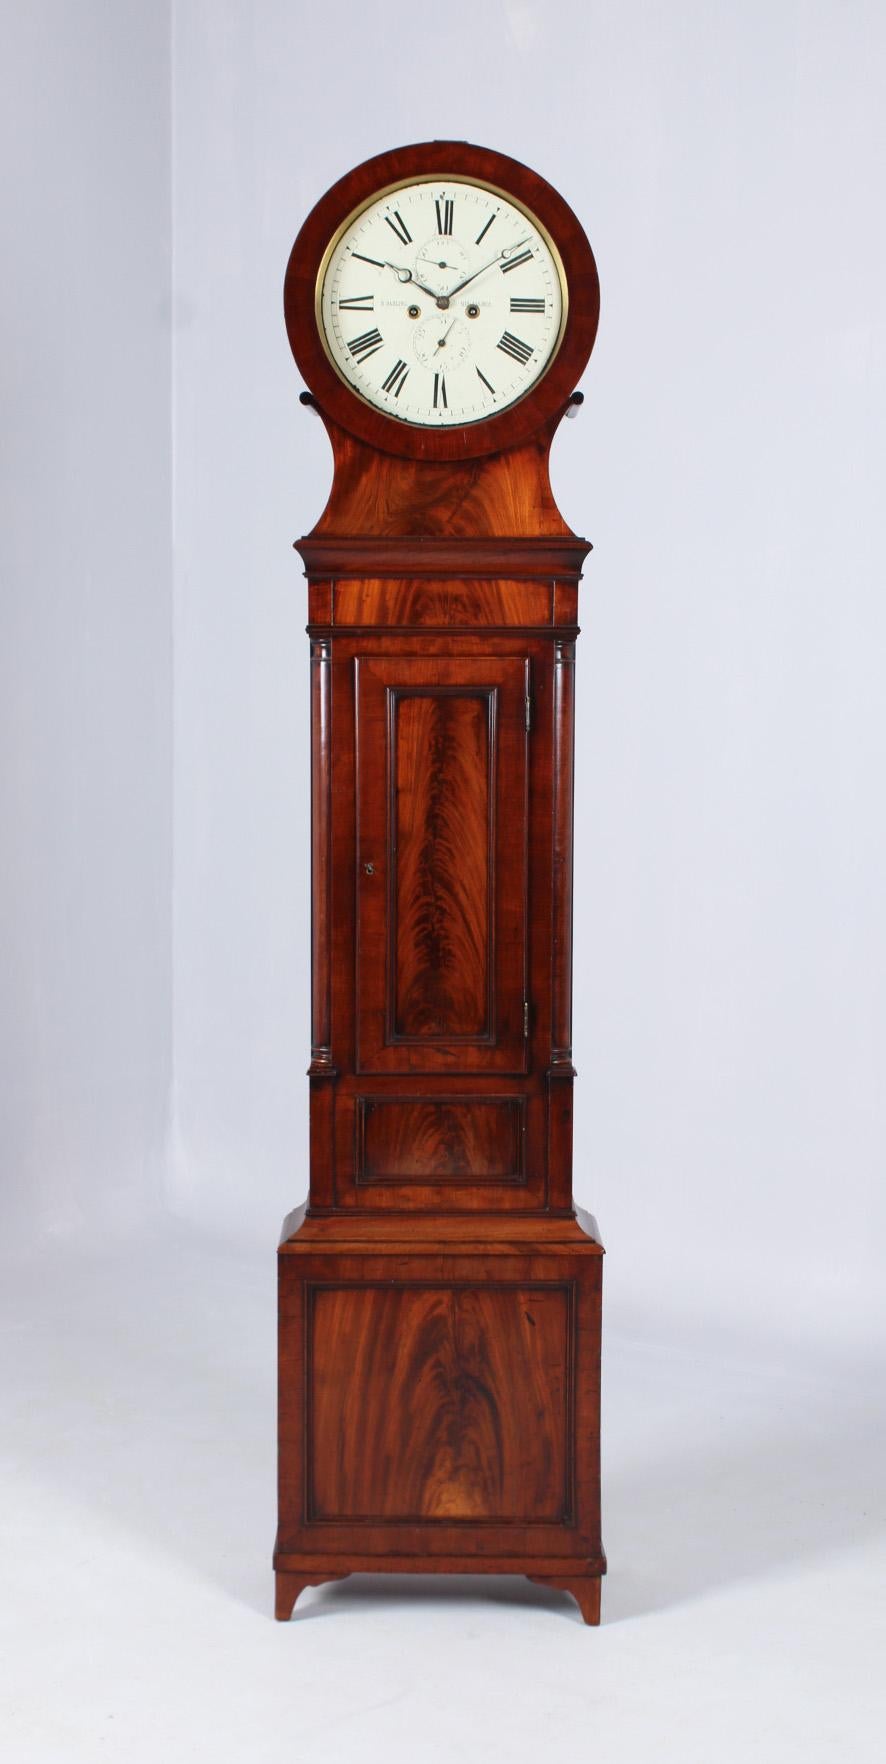 Scotland
Mahogany
Georgian, circa 1825

Measures: Height 208 cm, width 42 cm, depth 18 cm

Description: 
Antique mahogany grandfather clock with seconds pendulum and very attractive dial.
Slender longcase standing on delicate cut-out